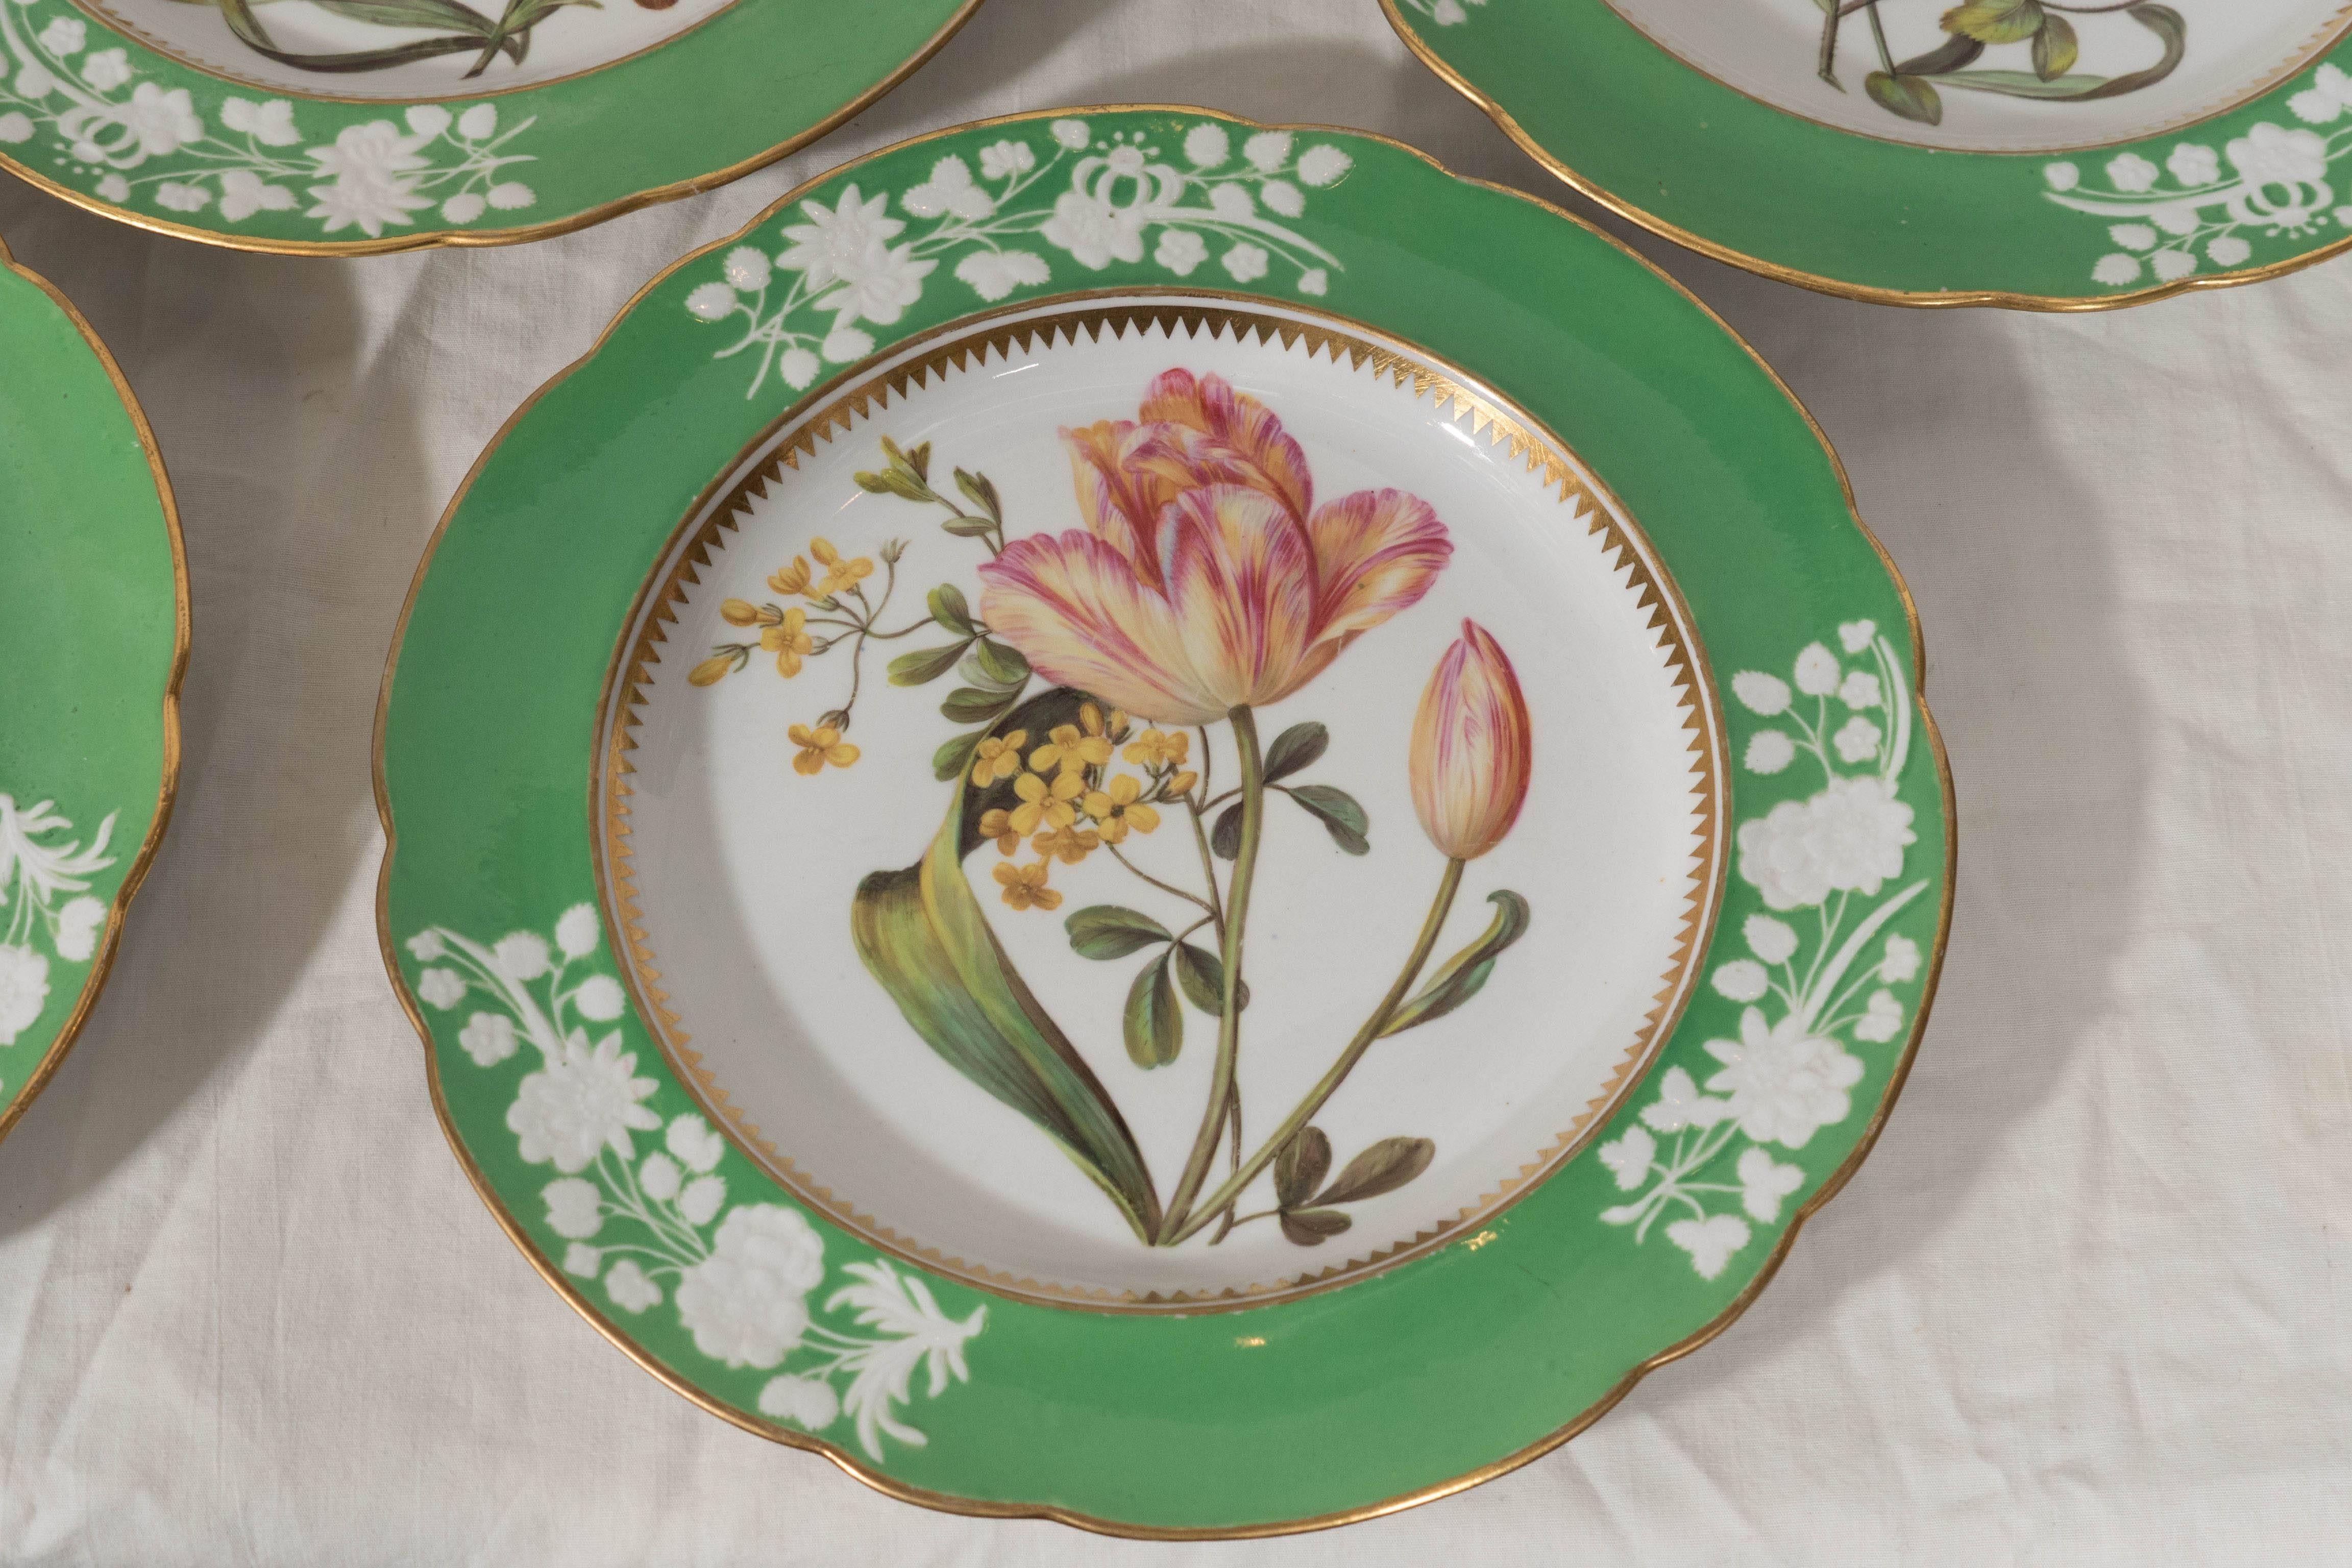 English Antique Porcelain Dishes Apple Green Borders Hand-Painted  Botanical Flowers